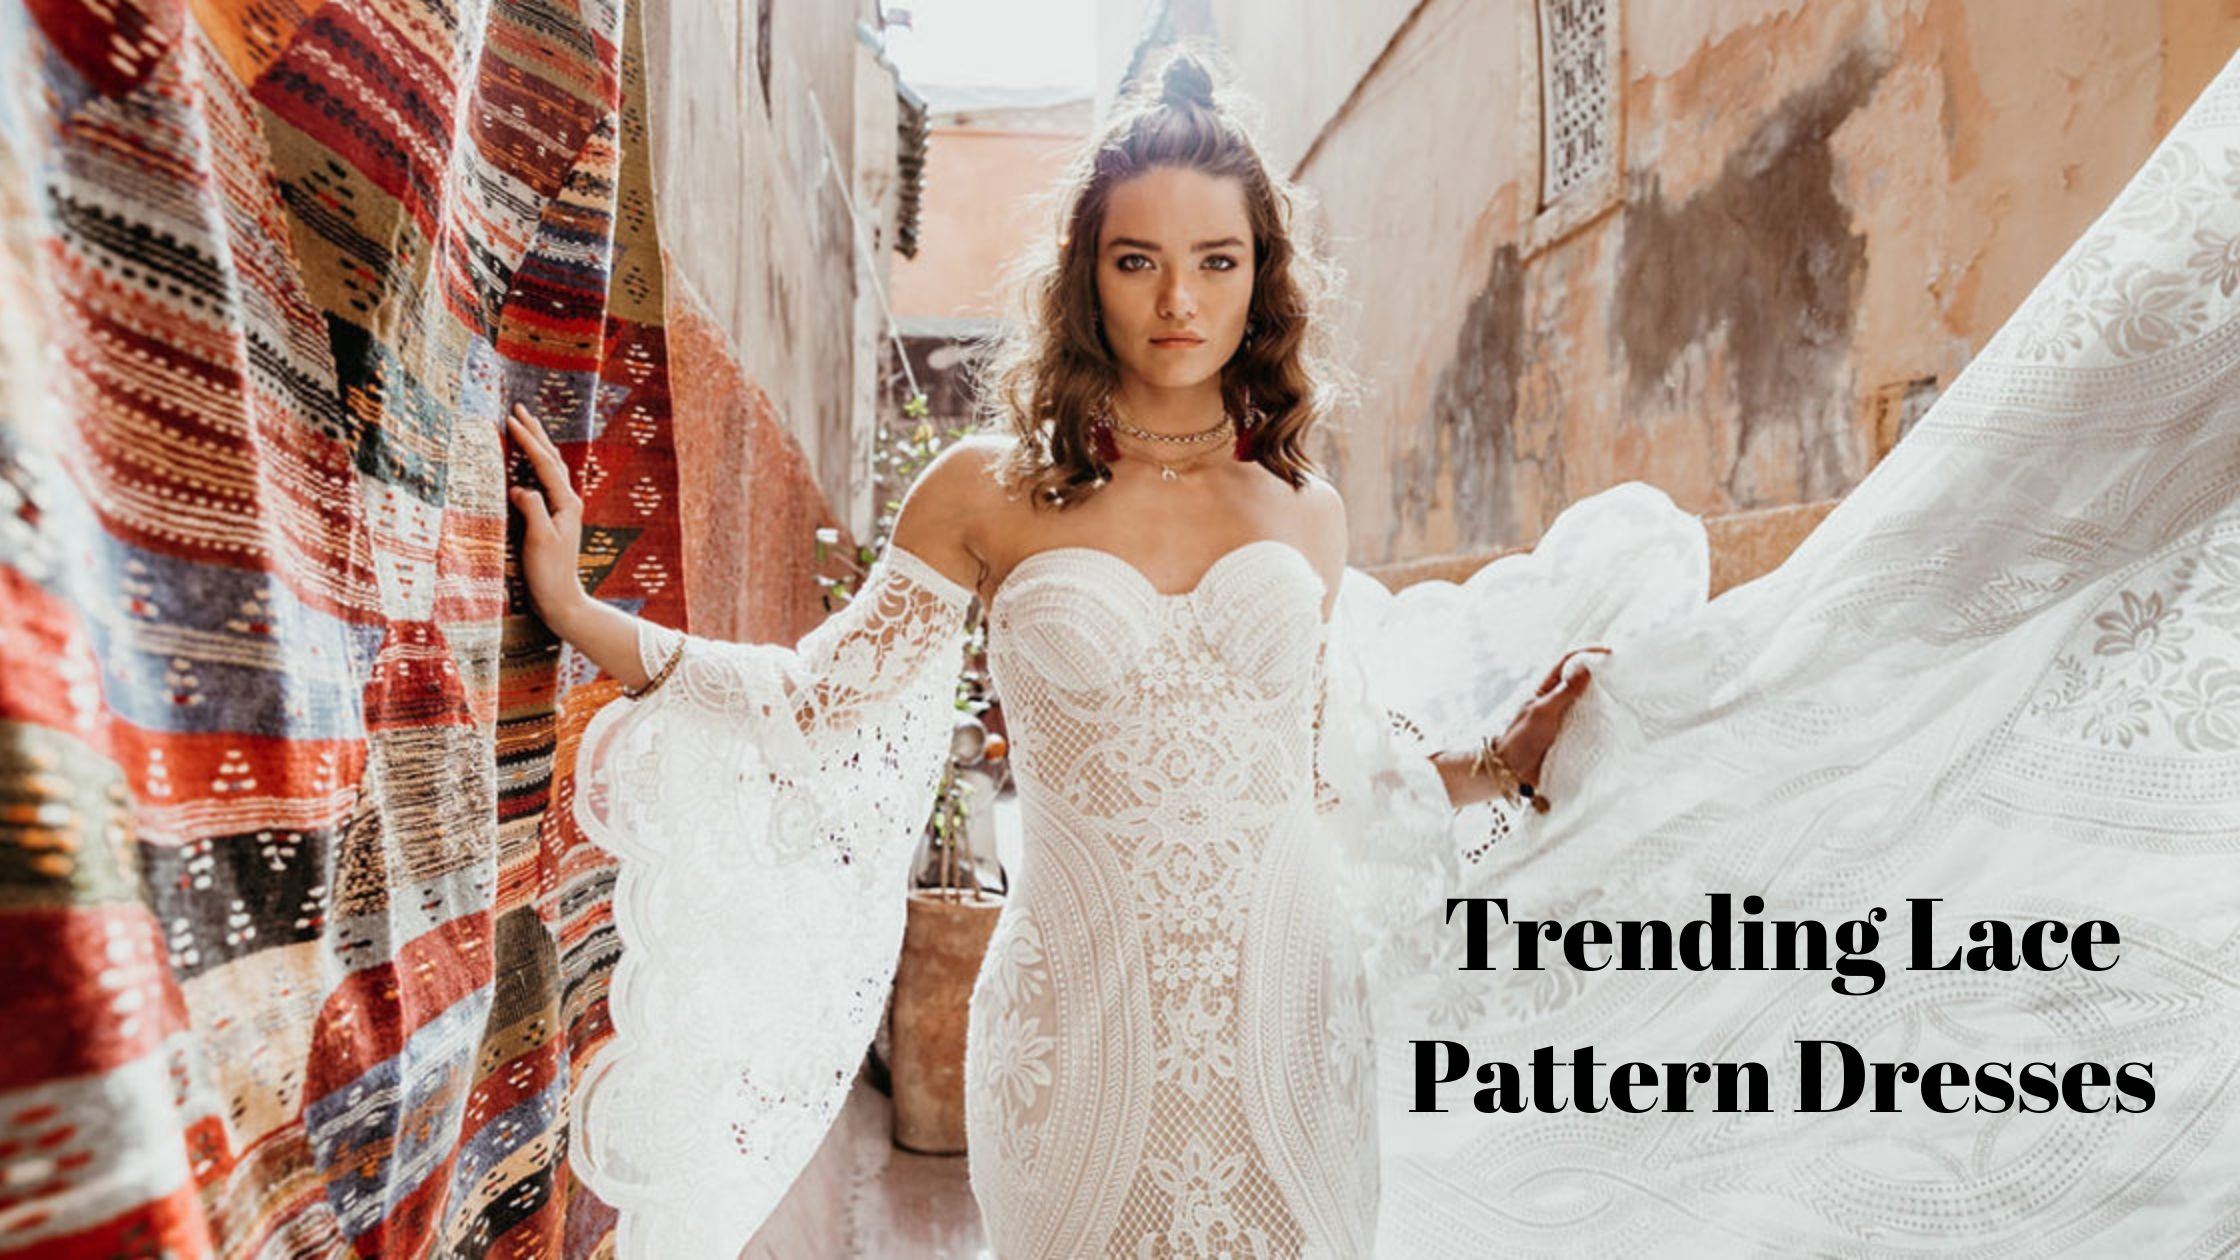 You are currently viewing Trending Lace Pattern Dresses